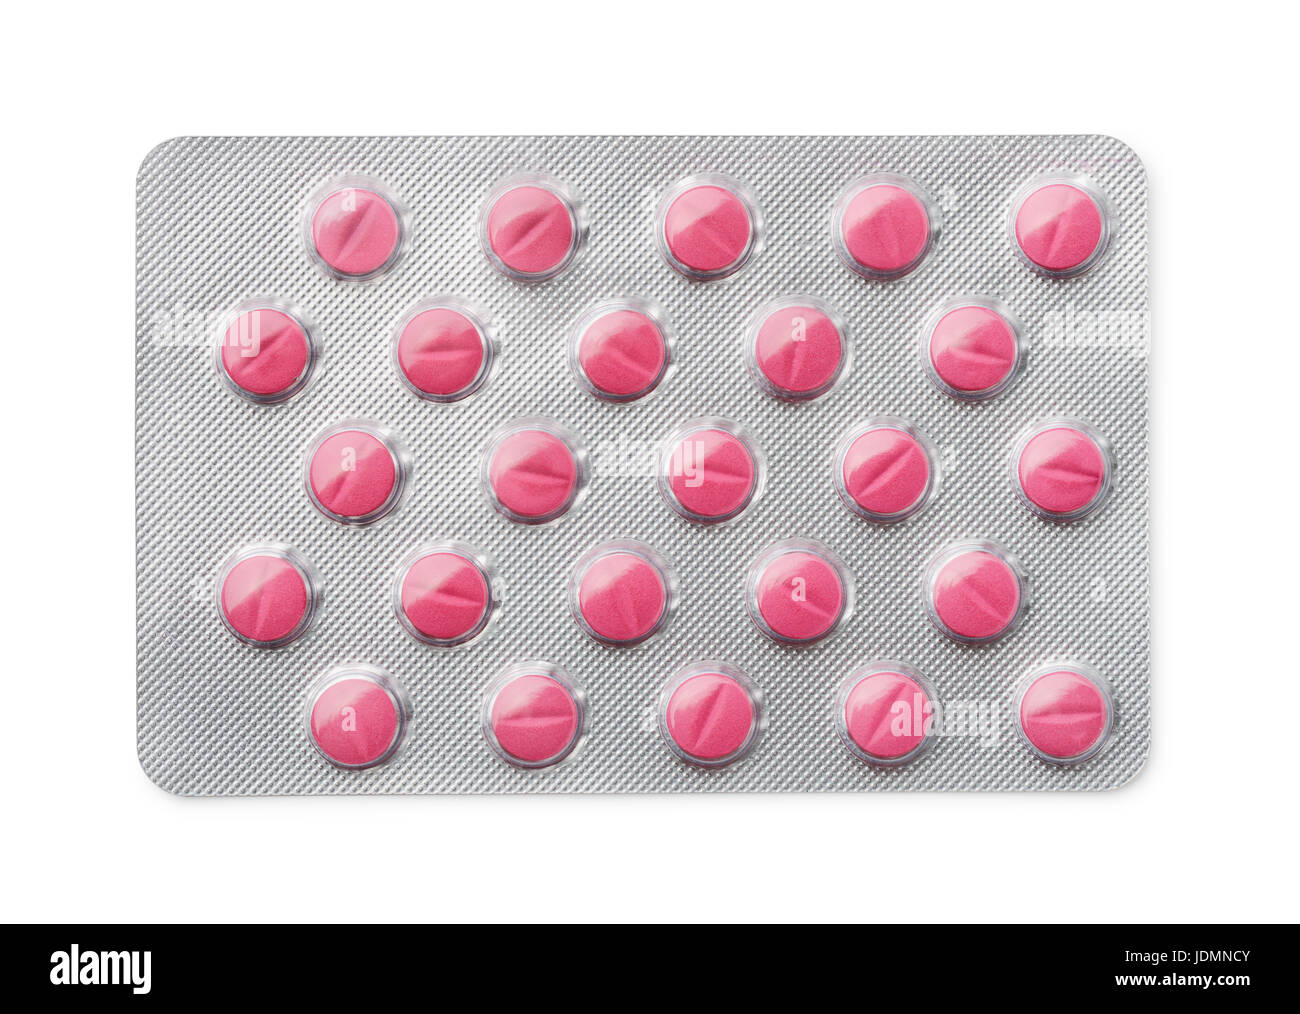 Blister pack of pink pills isolated on white Stock Photo